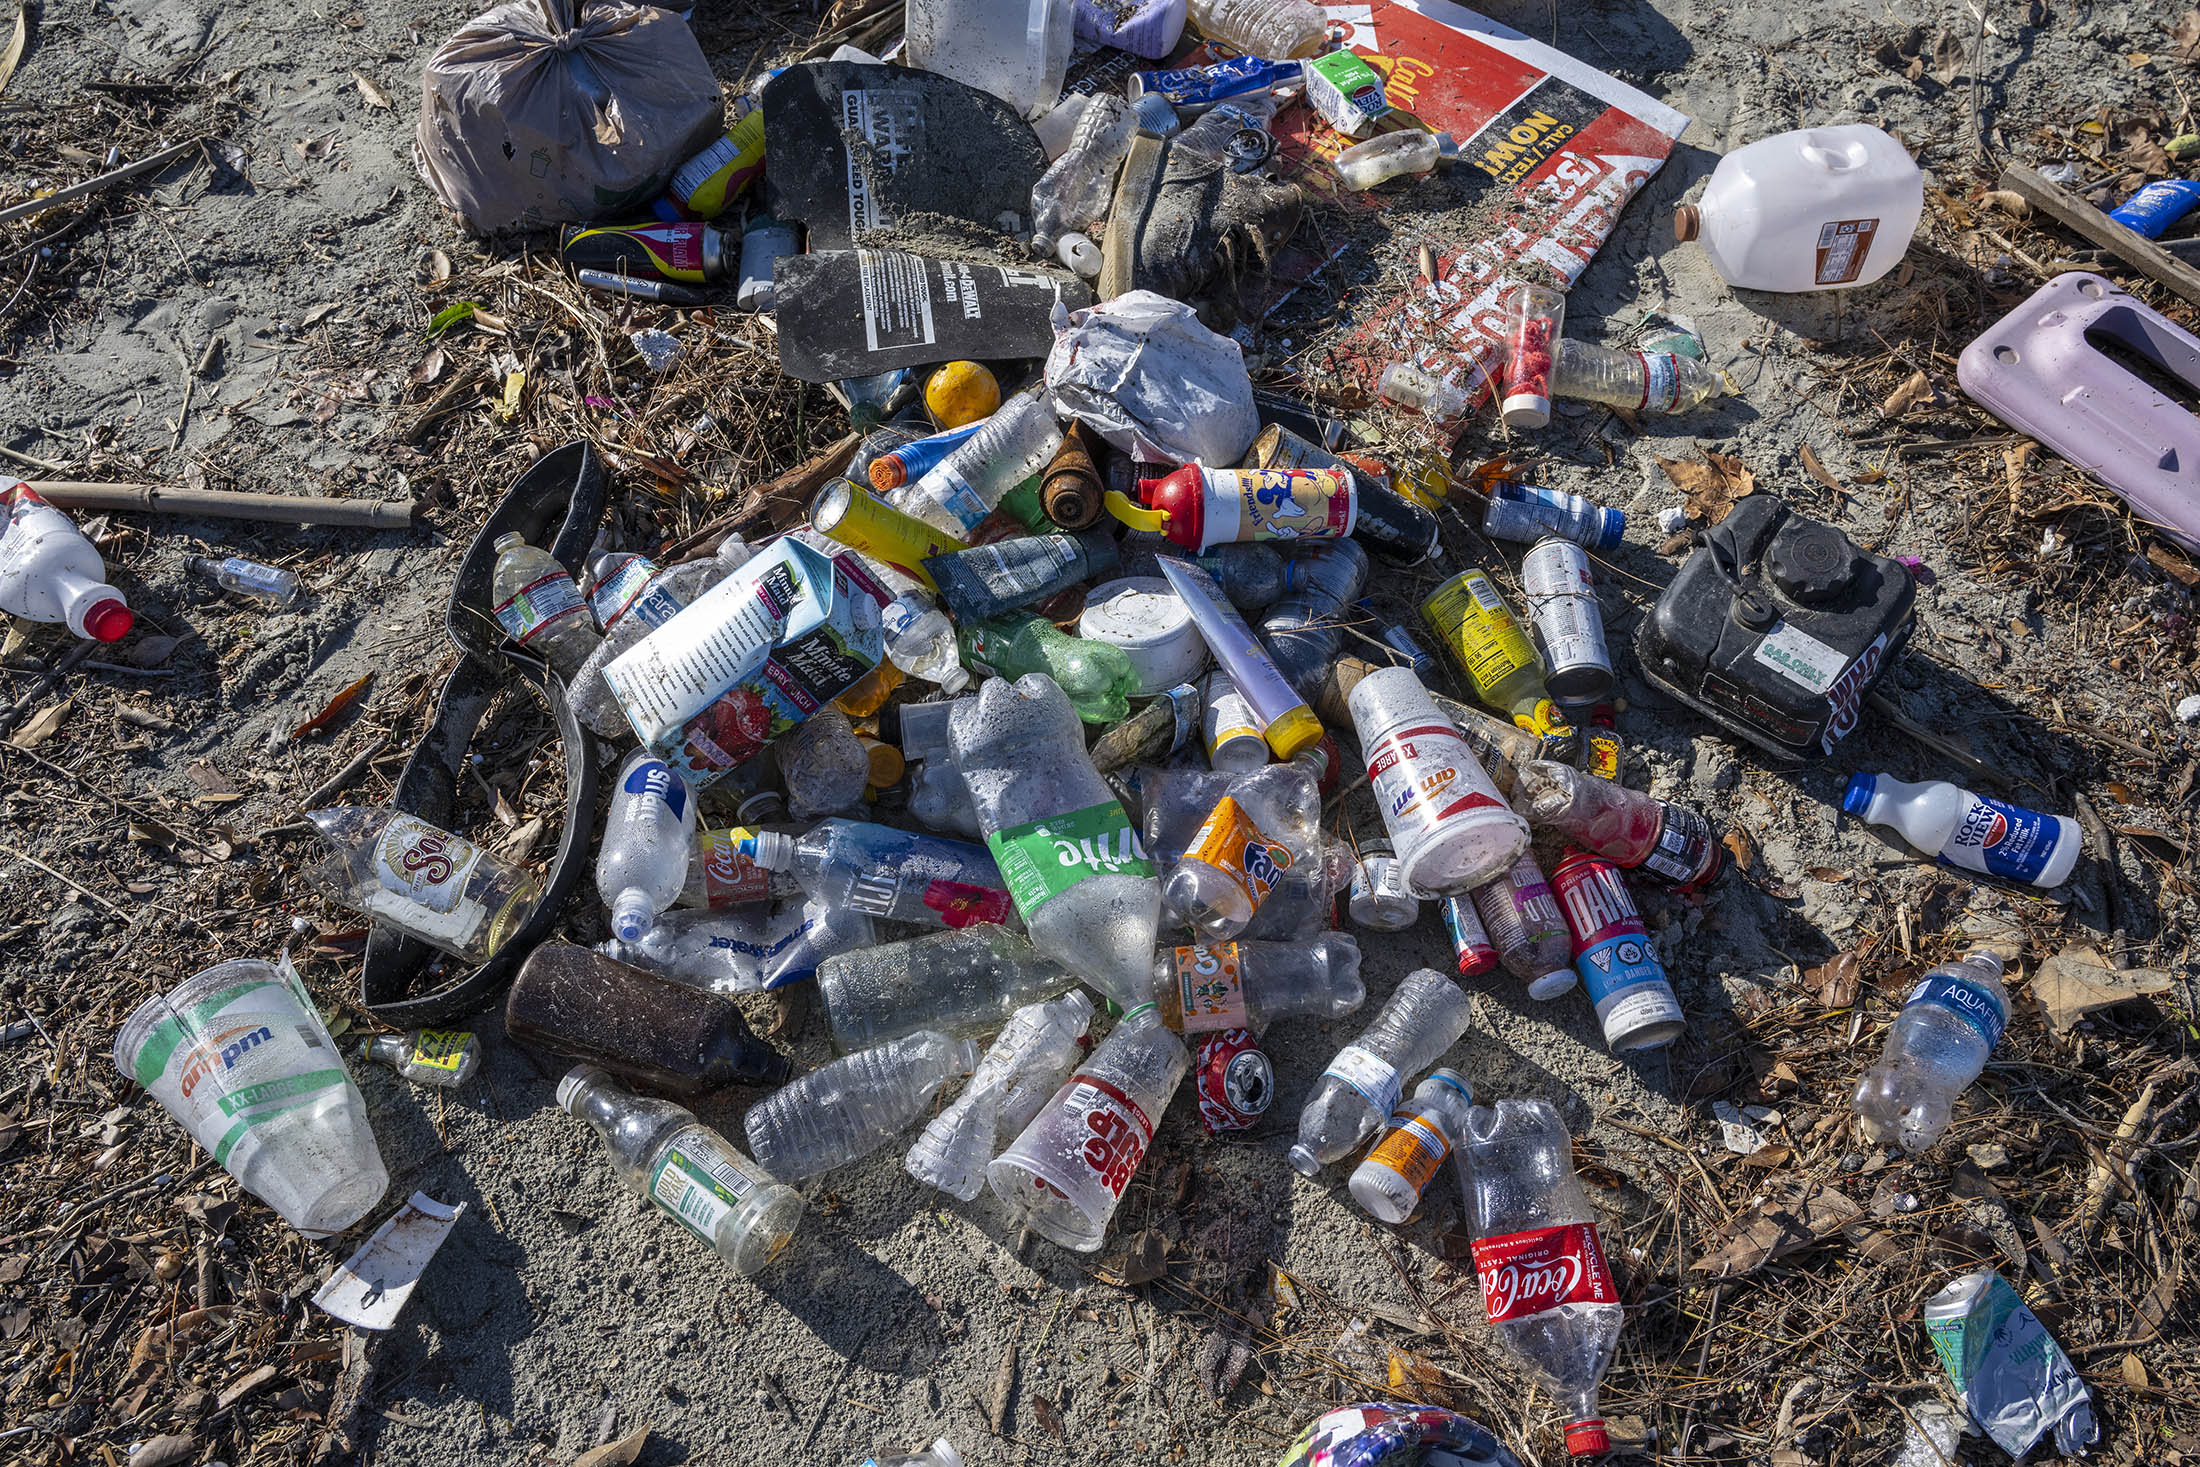 Plastic bottles and other trash washed up on the shore of the San Gabriel River, near the Pacific Ocean, following heavy rains in Seal Beach, California, on Dec. 13, 2022.